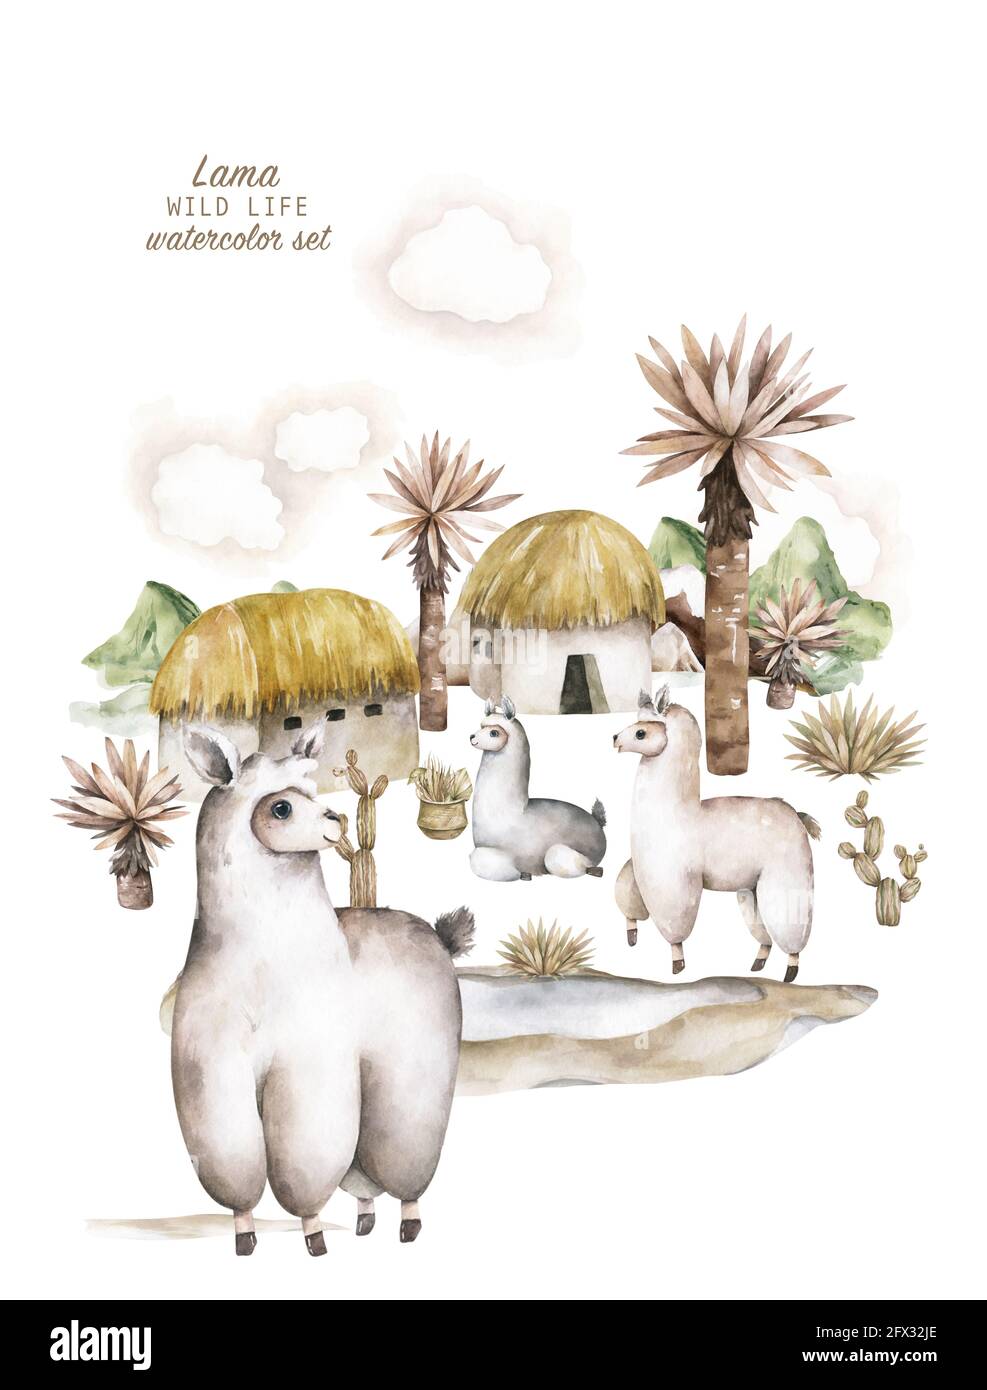 Baby Shower for boy, girl. Cute llamas alpaca characters smiling, walking, in Peru desert landscape with cactuses. Mexican funny lama animal family Stock Photo